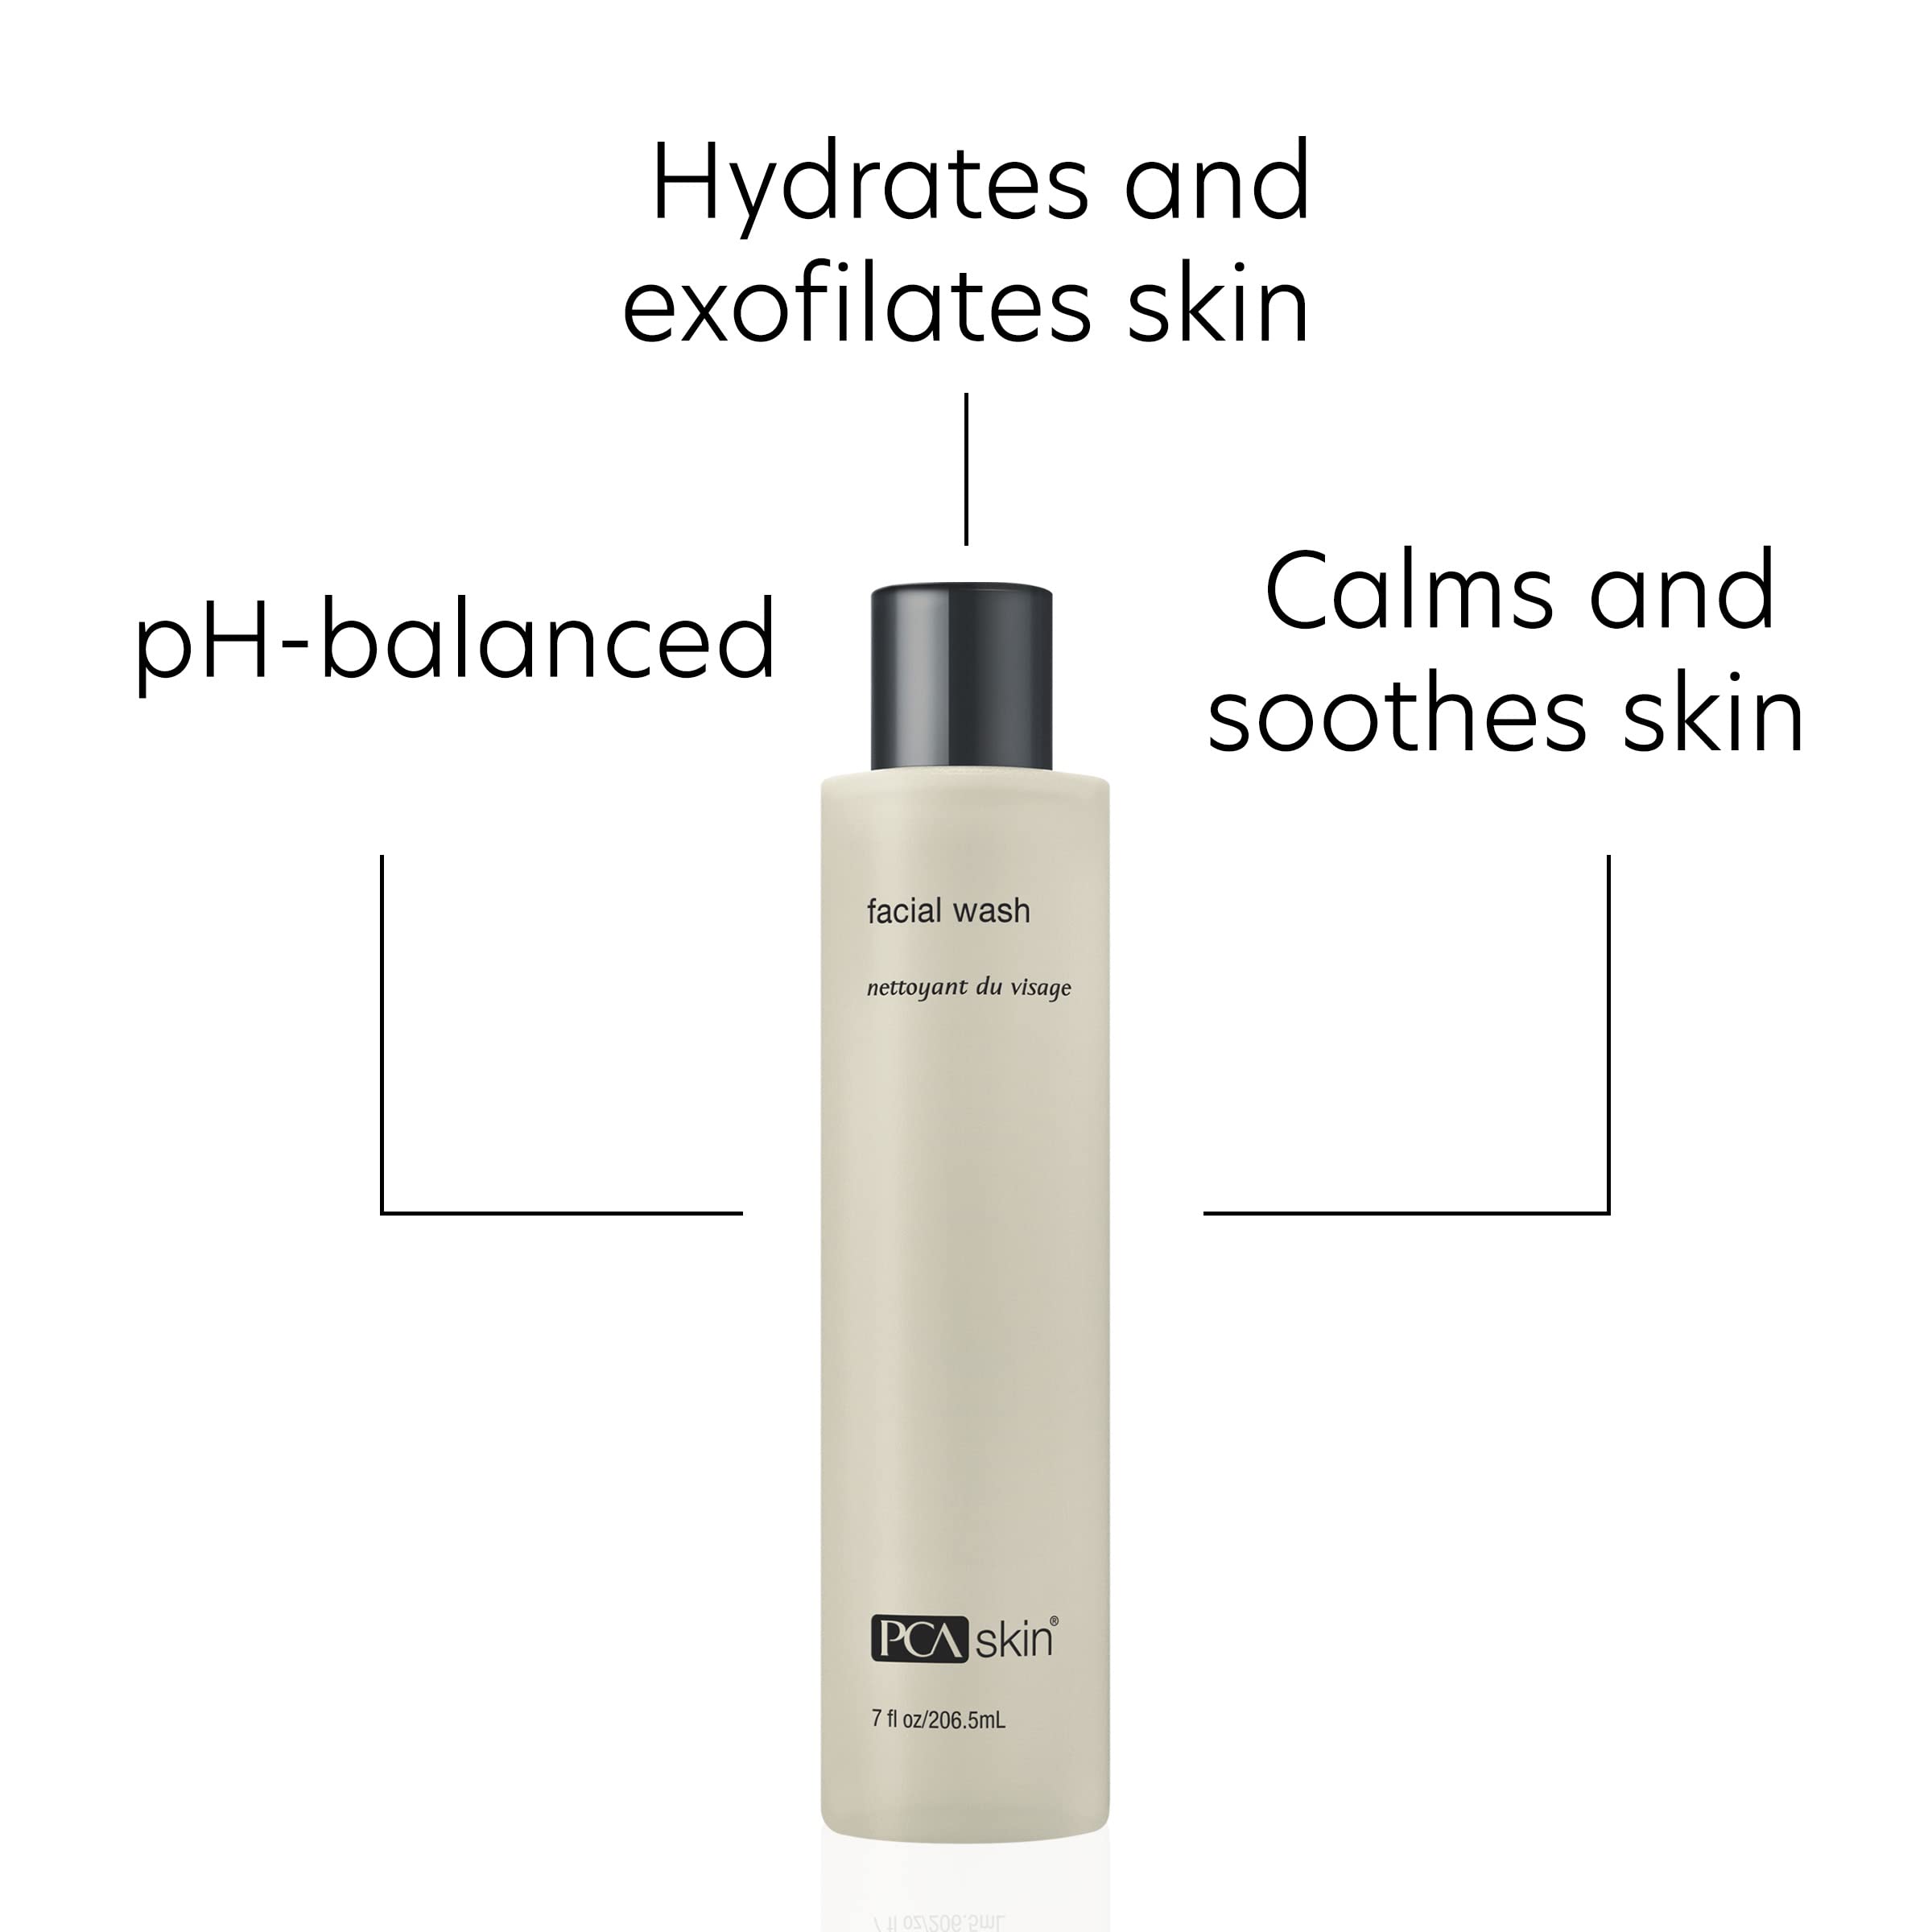 PCA SKIN Gentle Hydrating Facial Wash, Foaming Face Wash, Removes Makeup and Hydrates and Purifies Skin, Good for Sensitive, Combination, and Normal Skin, Hydrating Face Wash, 7 oz Bottle